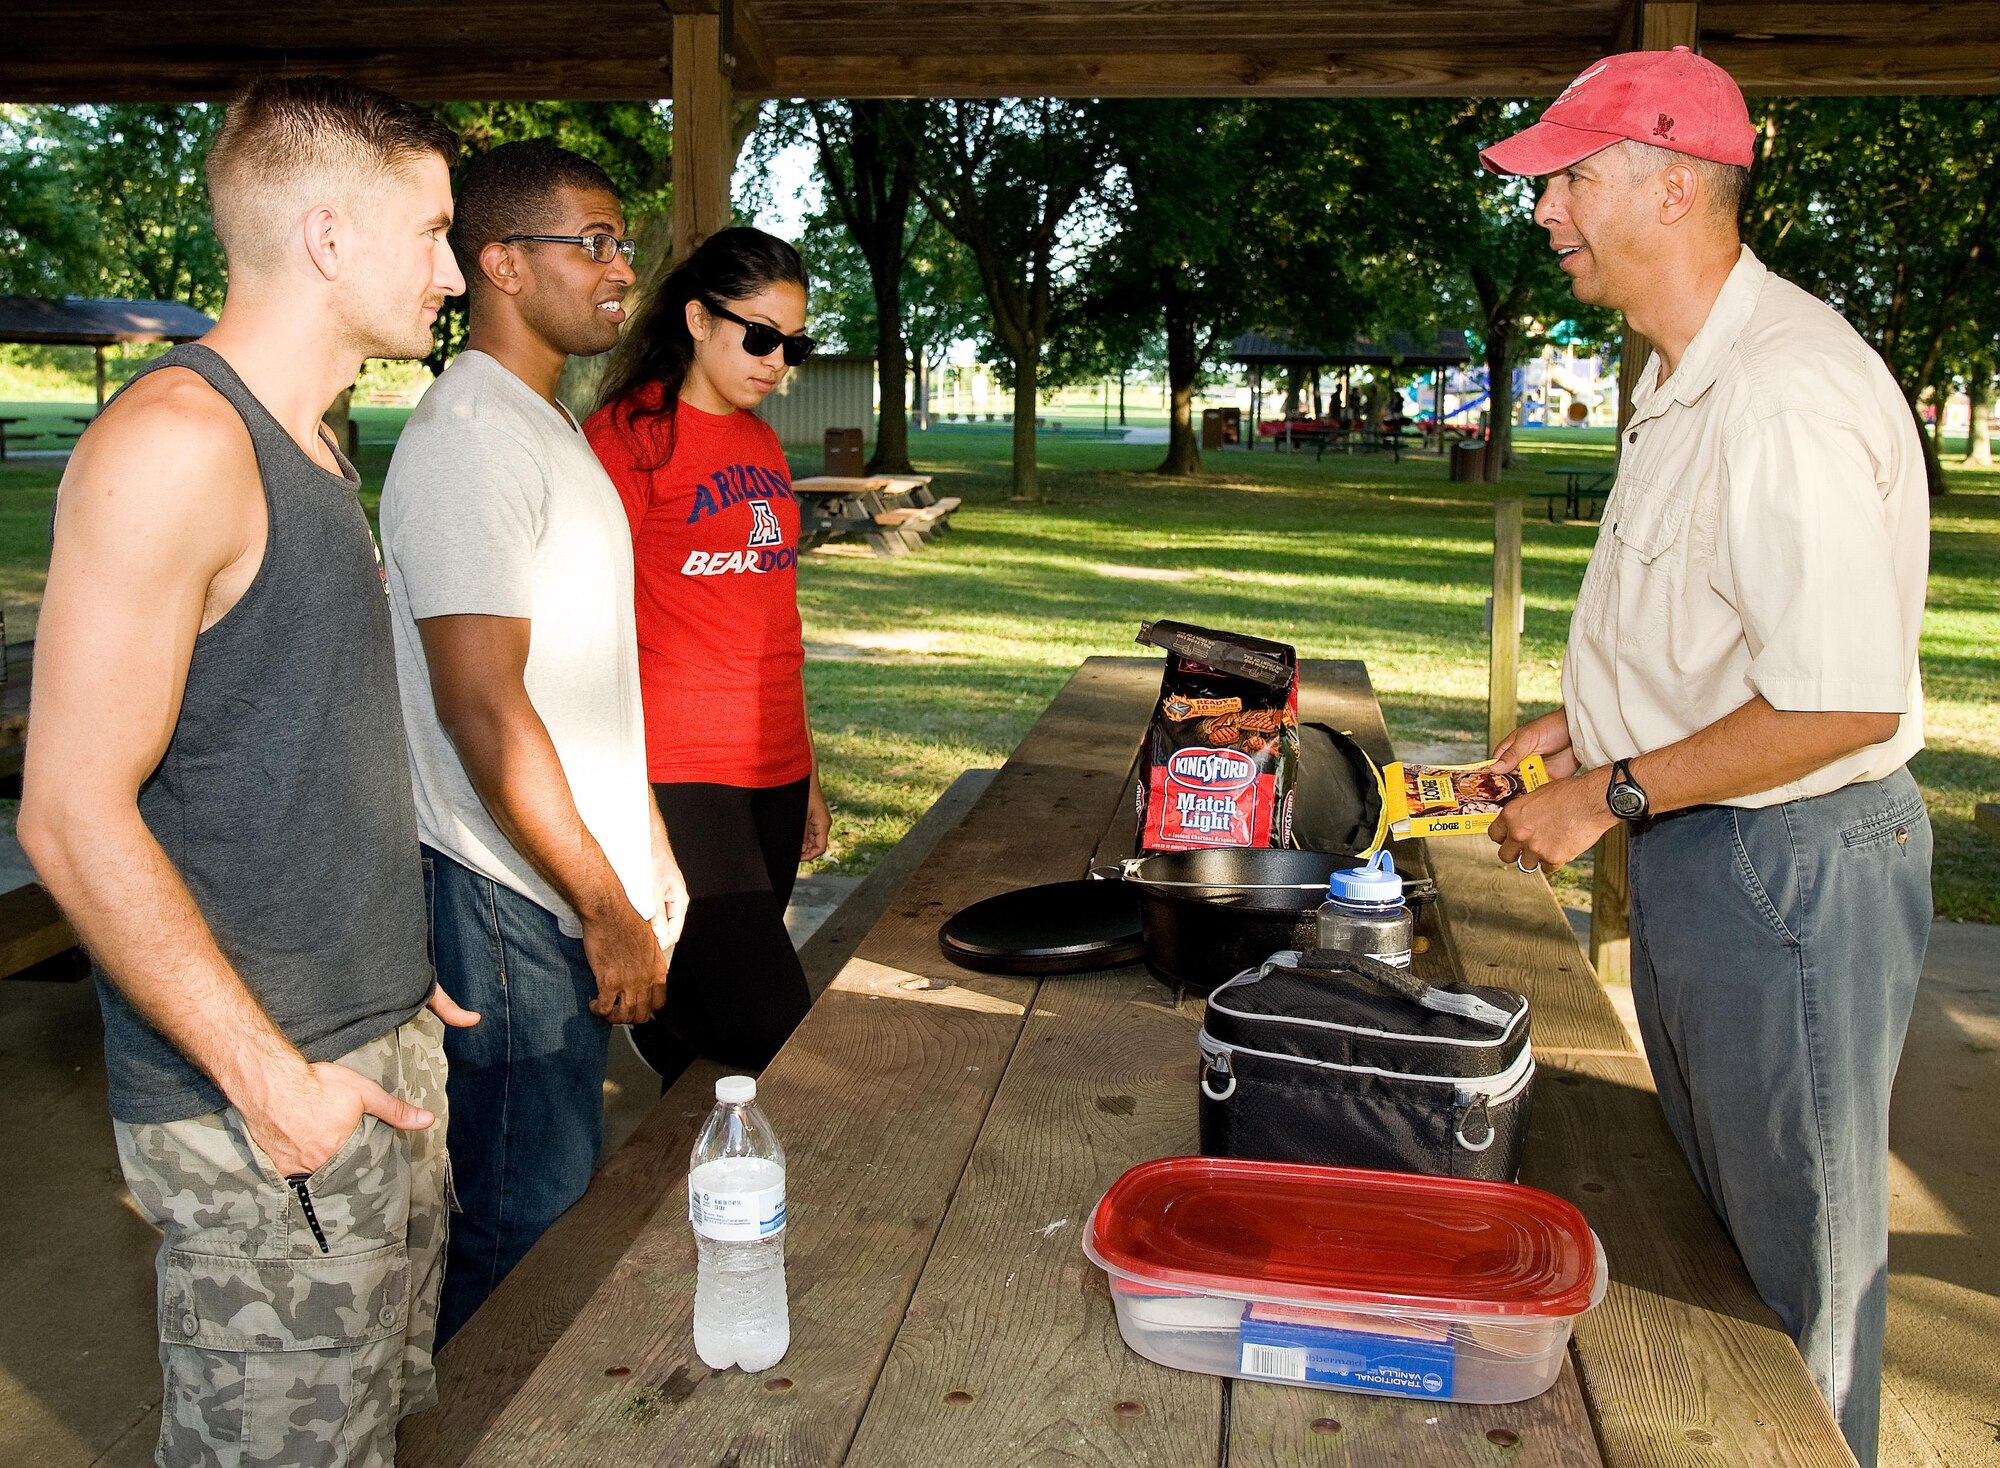 Col. Randy Boswell, 436th Mission Support Group commander, right, talks with Dorm to Gourm participants Sept. 13, 2016, at the Eagle’s Nest picnic area on Dover Air Force Base, Del. Boswell instructed the participants on the preparation of blueberry cobbler and gave tips on baking with a Dutch oven. (U.S. Air Force photo by Roland Balik)